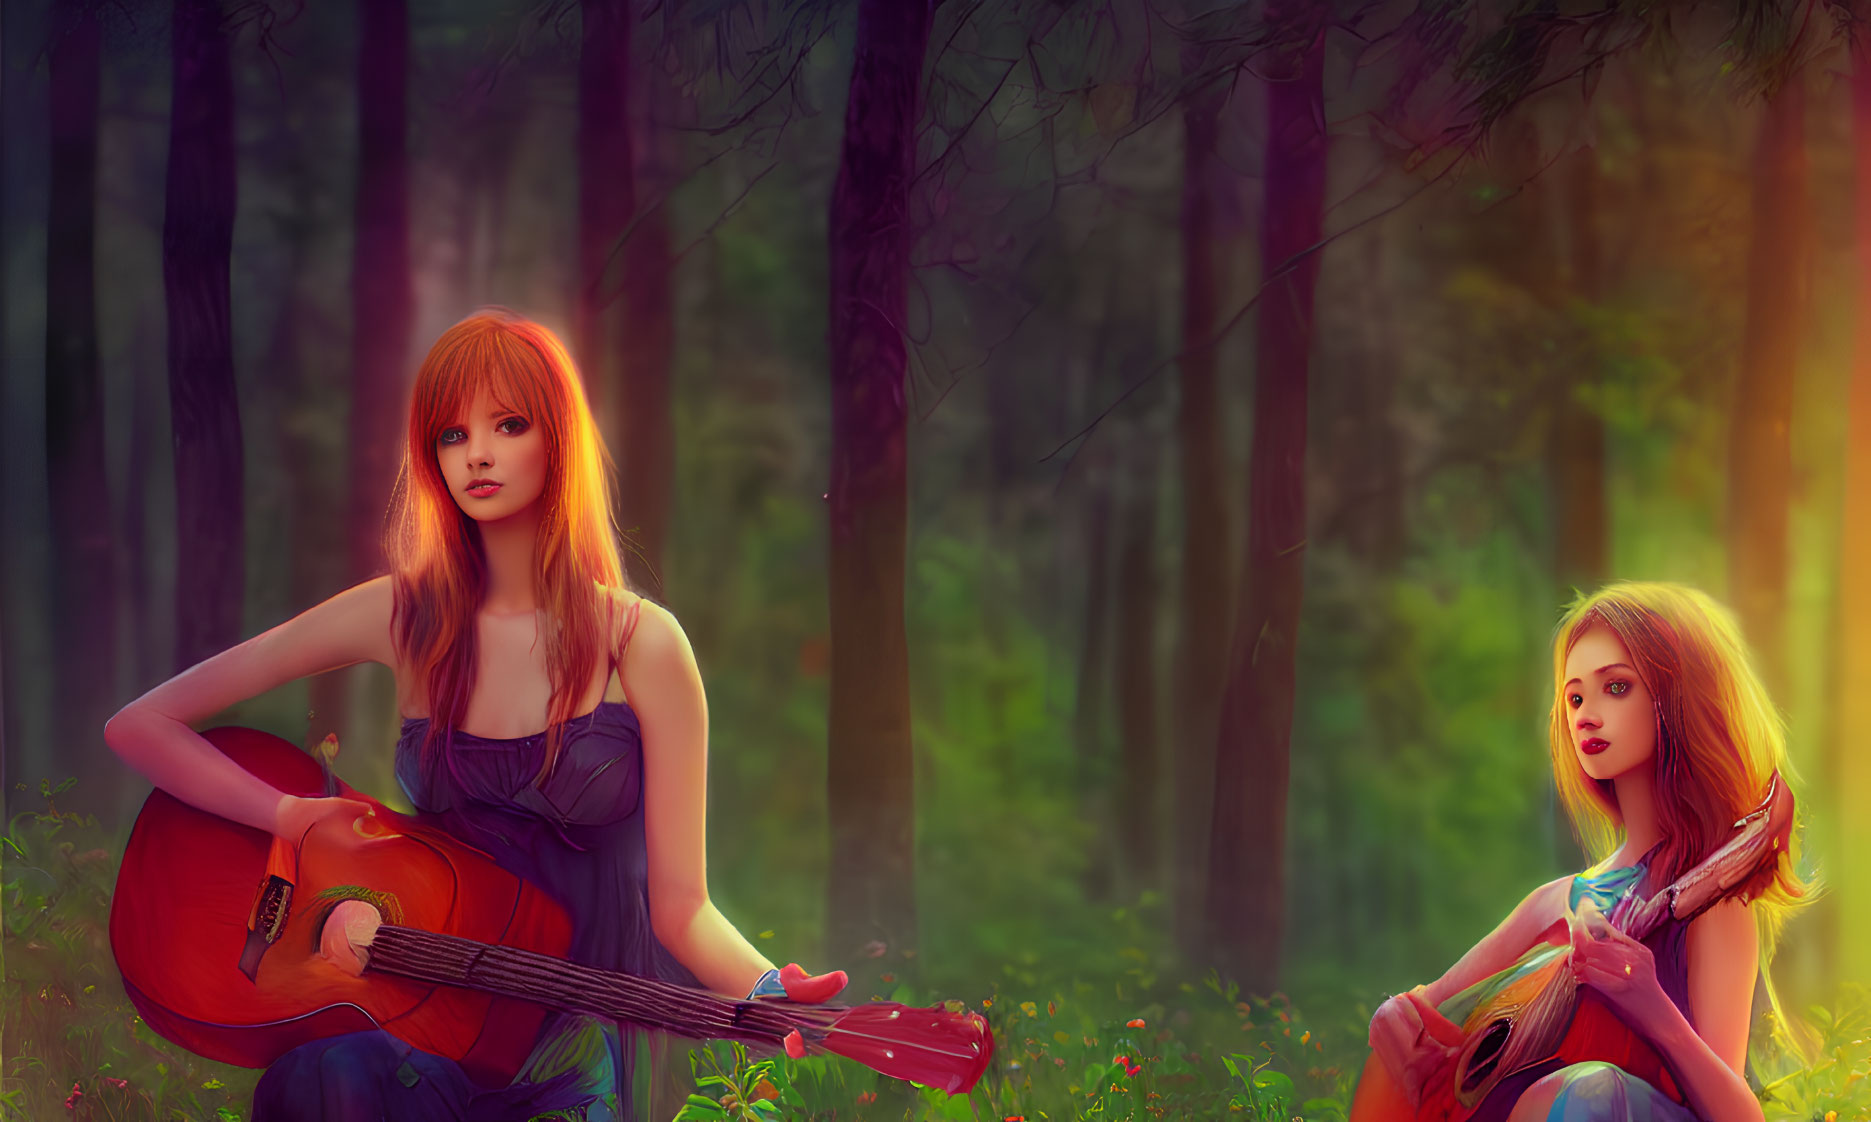 Two women playing guitars in a mystical forest with warm sunlight.